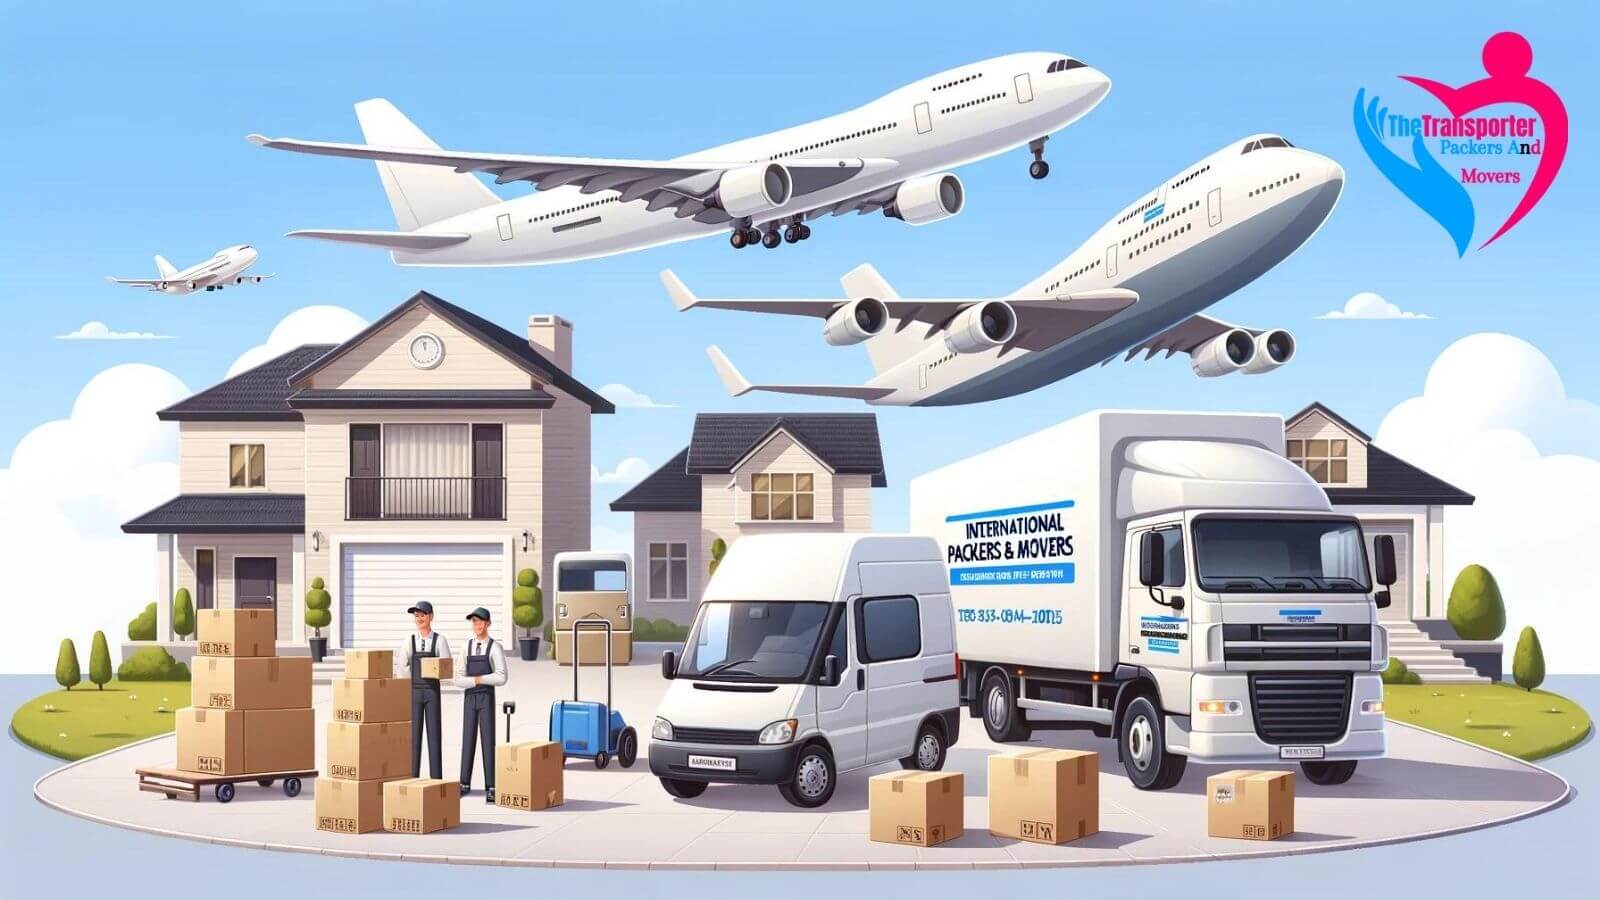 Rajkot International Packers and Movers: Ensuring a Smooth Move